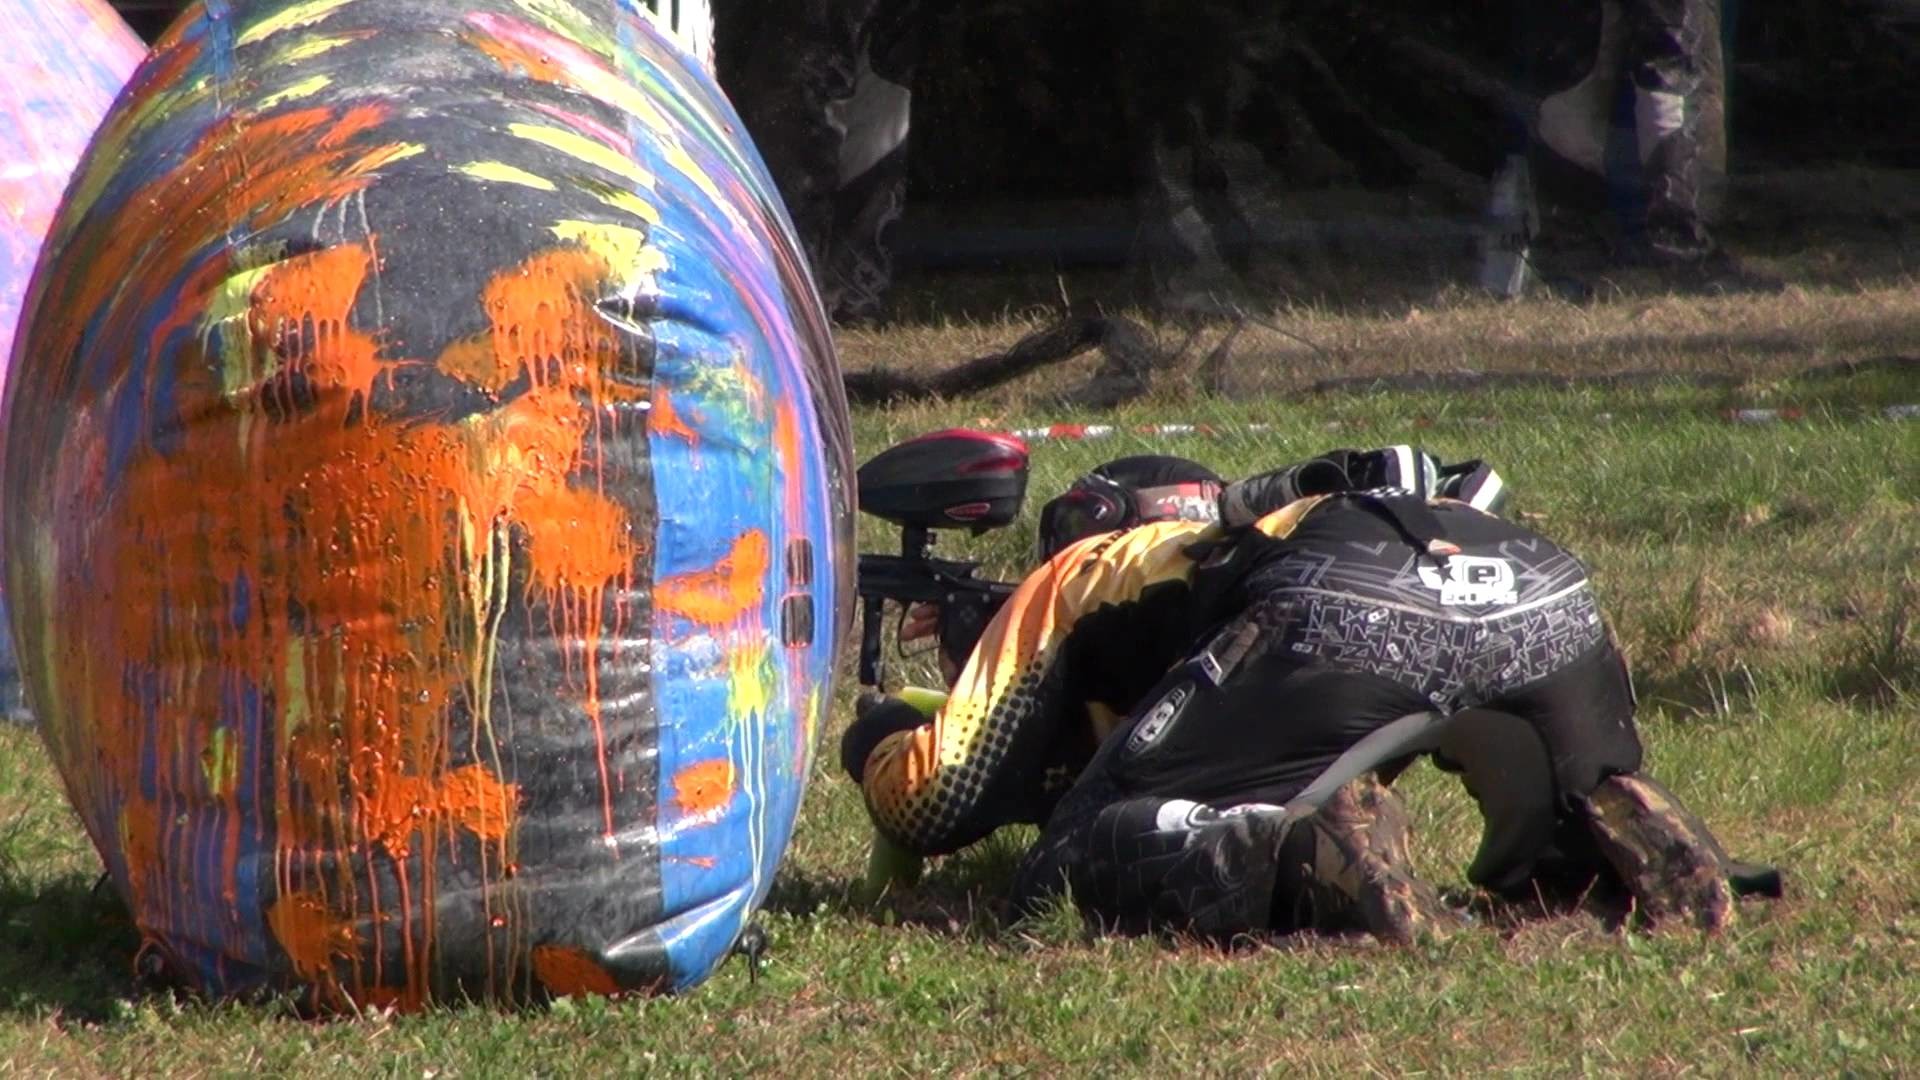 1920x1080 Speedball - NLP (National Paintball League) - Finals - 24.09.2011 -  Additional & Extended - HD 1080 - YouTube